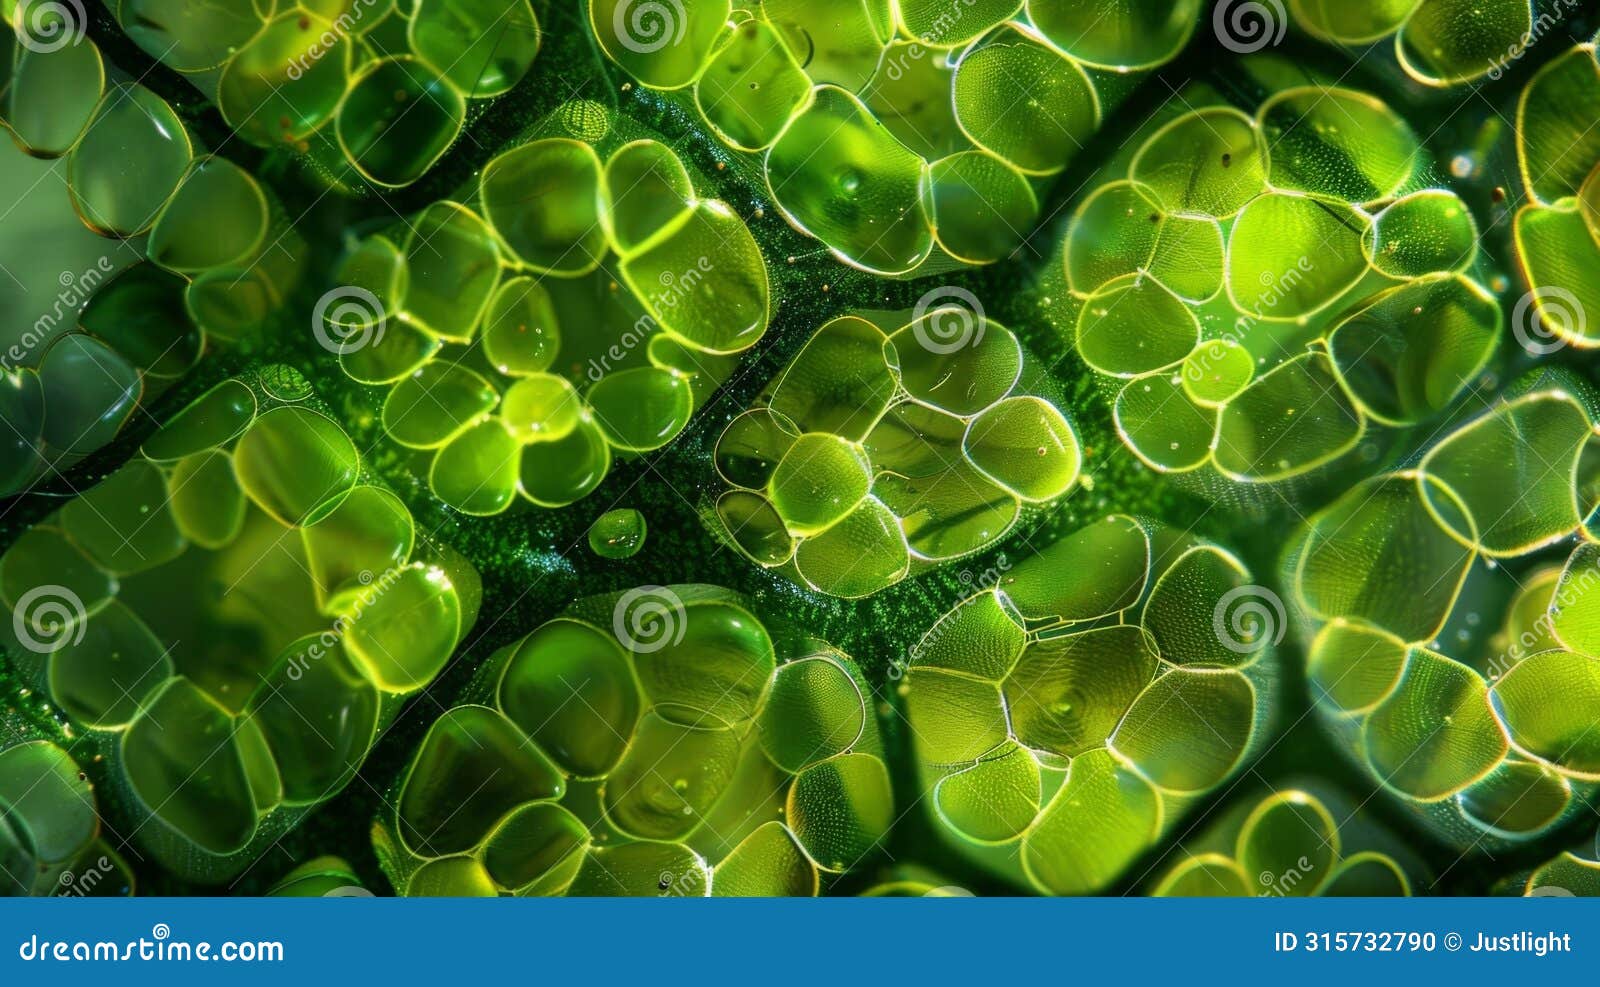 an image of a cross section of a plant stem reveals vibrant green parenchyma cells densely packed and full of